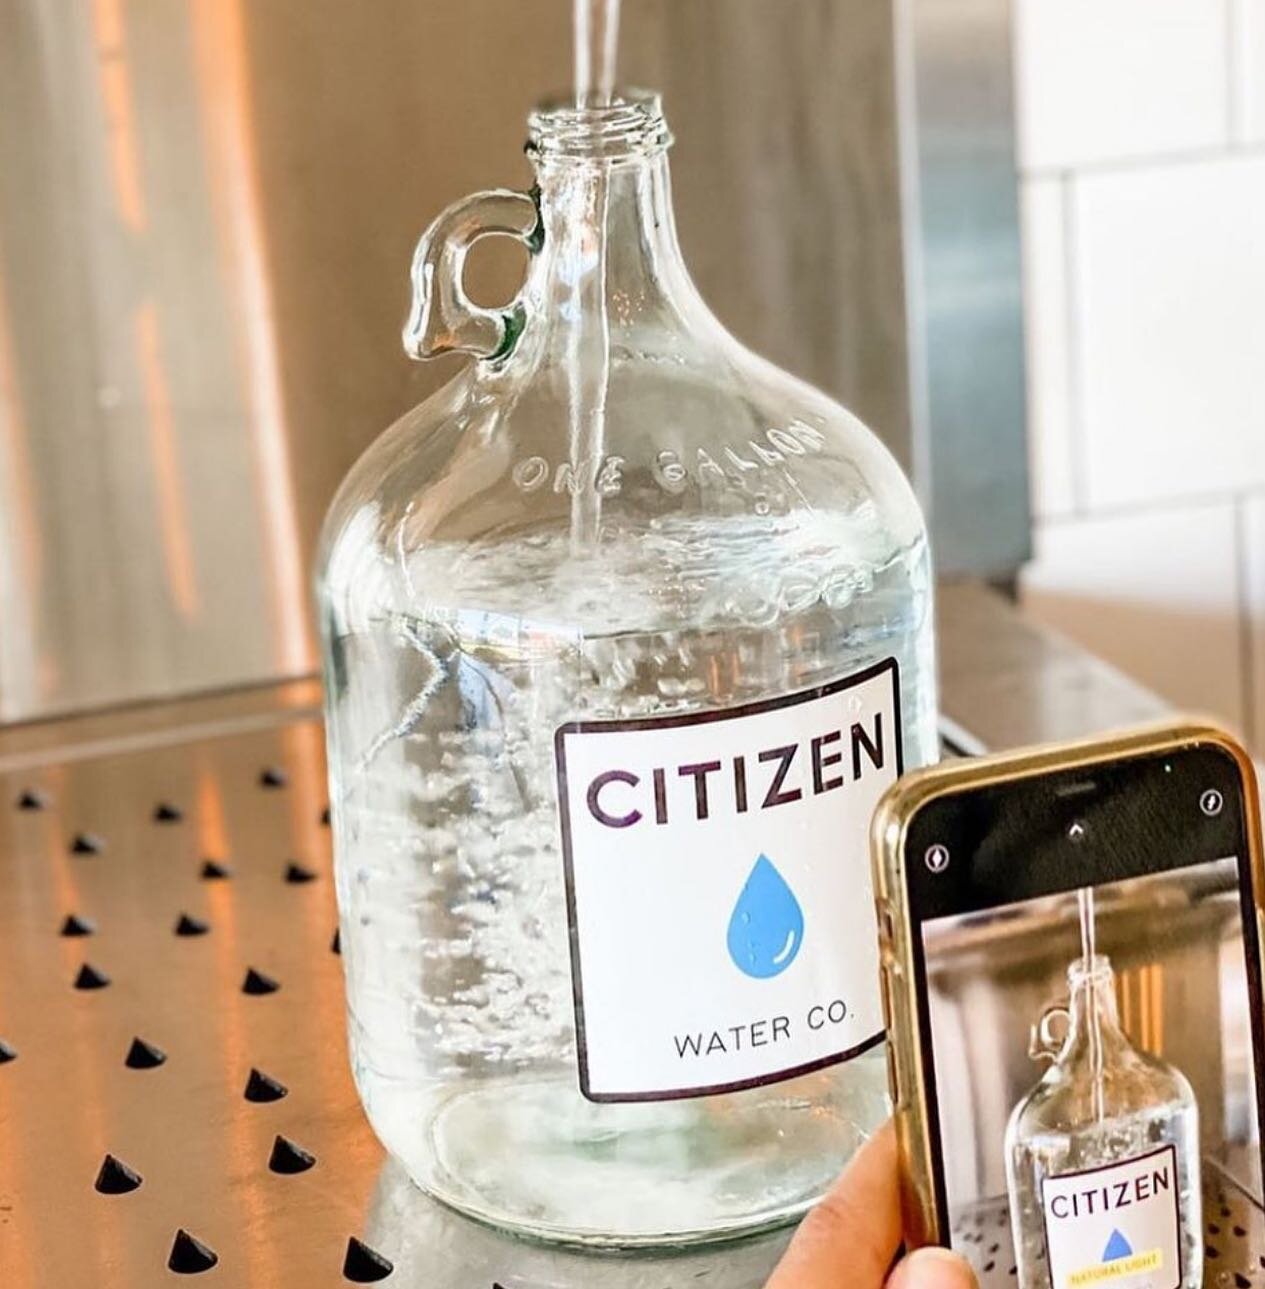 #StayHydrated + Fill-up for the weekend ahead @citizenwaterco 💦 &bull;
&bull;
&bull;
#ShopLocal #ShopSmall #CostaMesa #beach #LoveWhereyouLive #Food #cleaners #restaurants #NewportBeach #VisitNewportBeach #IloveCostaMesa #IloveNewportBeach #333East1